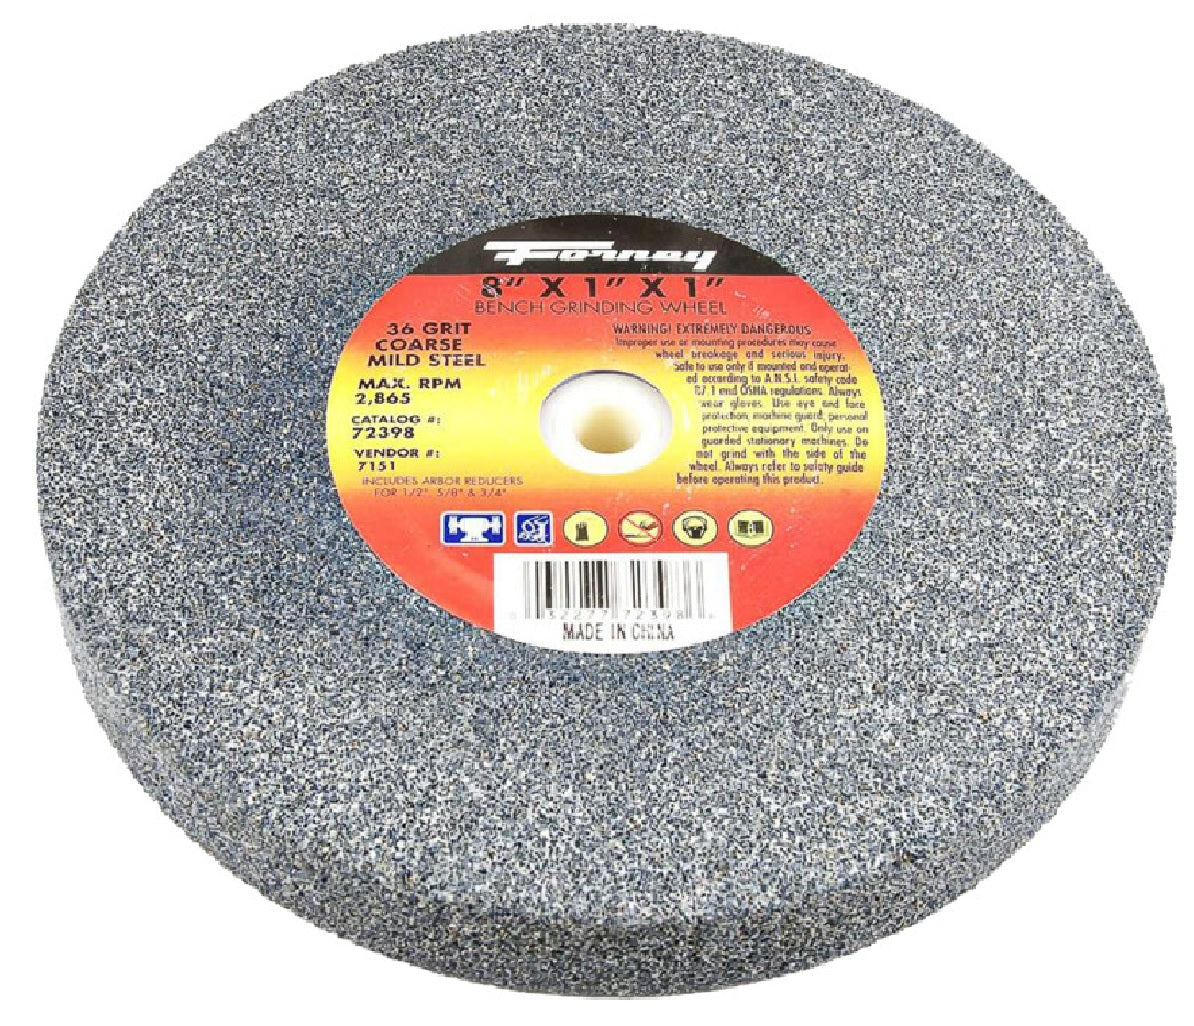 Forney 72398 Bench Grinding Wheel, 36-Grit